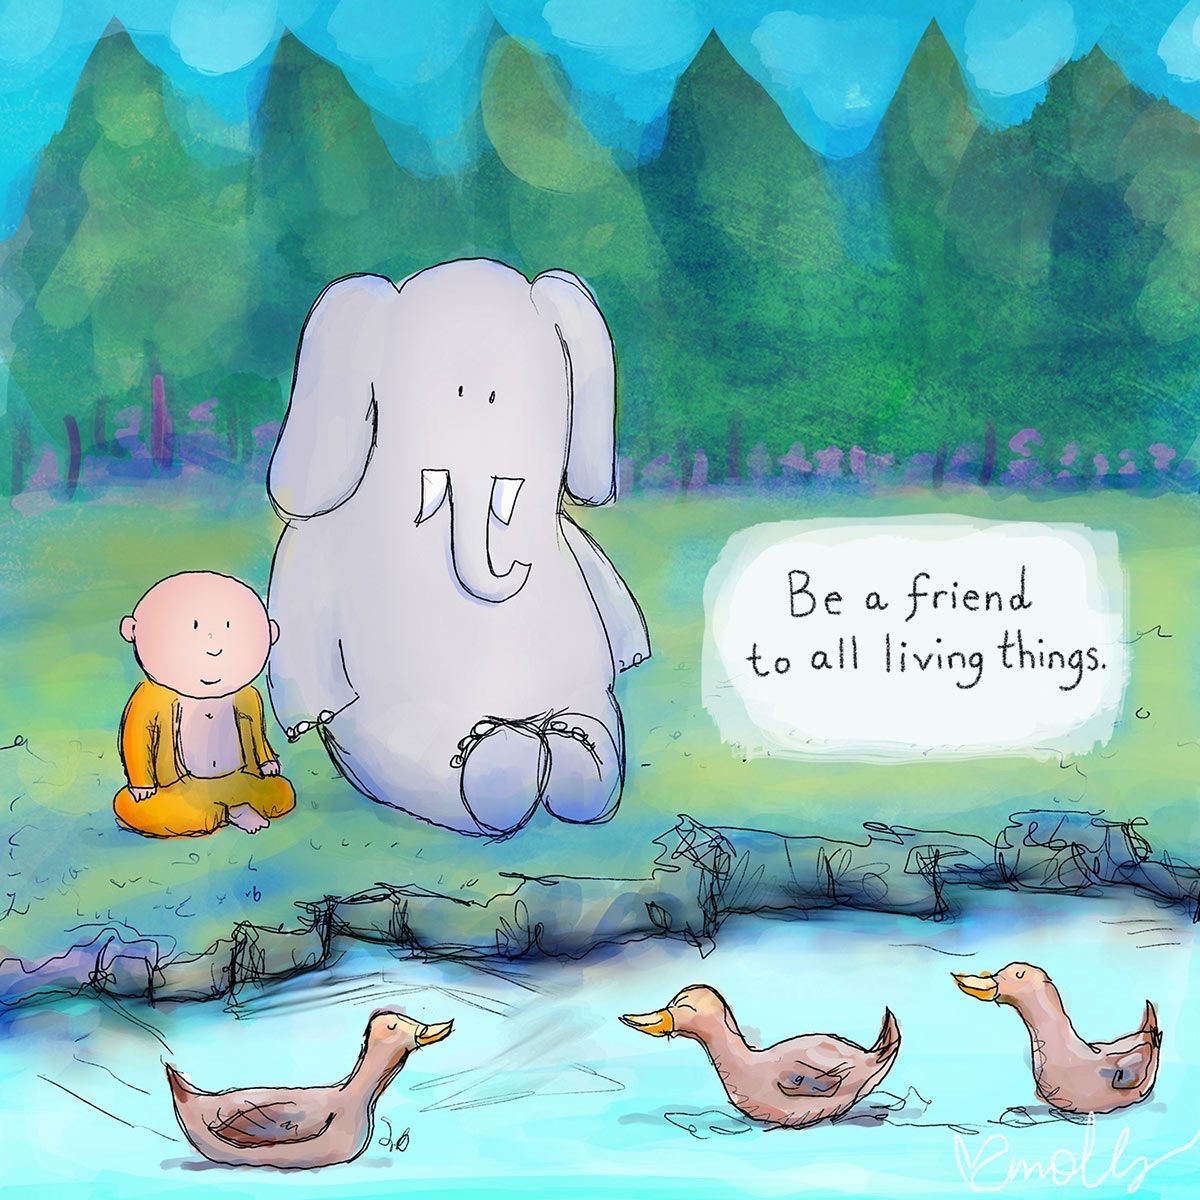 Be a friend to all living things.